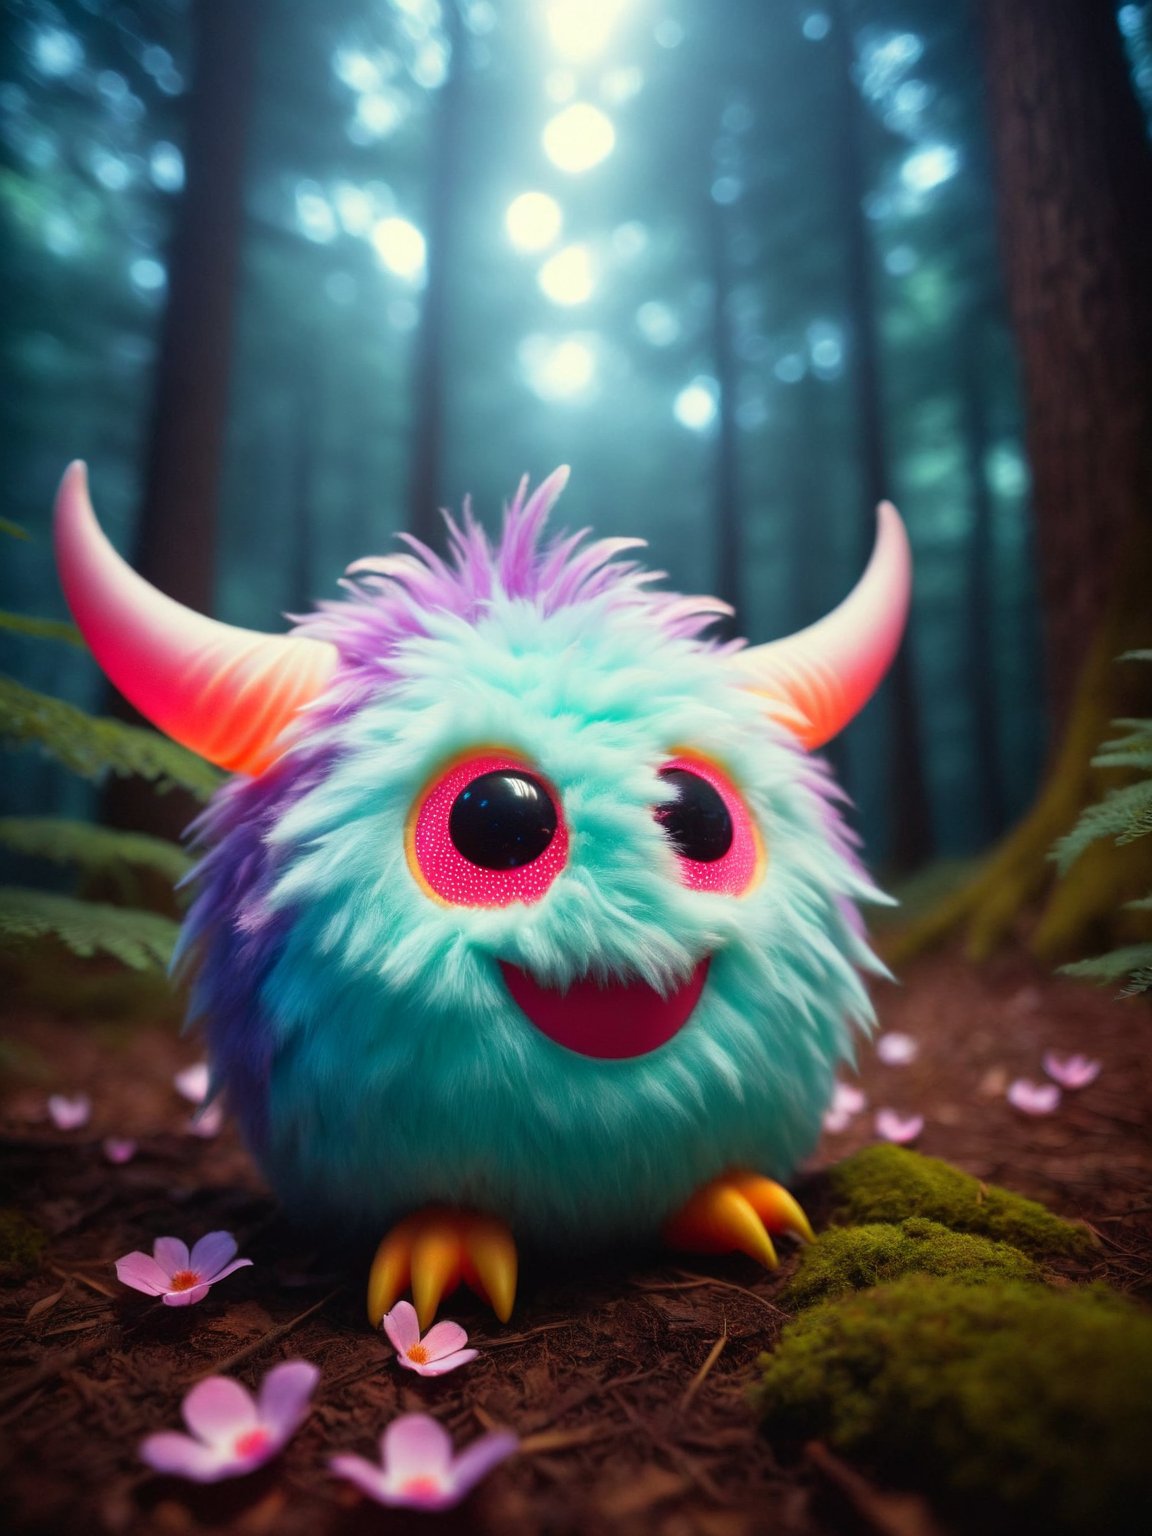 Light Cheery Atmosphere, photograph cinematic still robust bioluminescent vivid adorable cute smiling pink and purple polka-dotted furry egg-shaped mini-monster with furry hands and feet, glowing red eyes, horns, cute long fangs, rainbow wings, in the fabulous night forest, magical radiance, depth of field, realistic, cinematic lighting, soft shadows, asymmetrical fractal, colorful, volumetric lighting, wind, petals falling, moonlight, forest in background . emotional, harmonious, vignette, highly detailed, high budget, bokeh, cinemascope, moody, epic, gorgeous, film grain, grainy, 50mm , cinematic 4k epic detailed 4k epic detailed photograph shot on kodak detailed cinematic hbo dark moody, 35mm photo, grainy, vignette, vintage, Kodachrome, Lomography, stained, highly detailed, found footage, happy, joyful, cheerful, carefree, gleeful, lighthearted, pleasant atmosphere